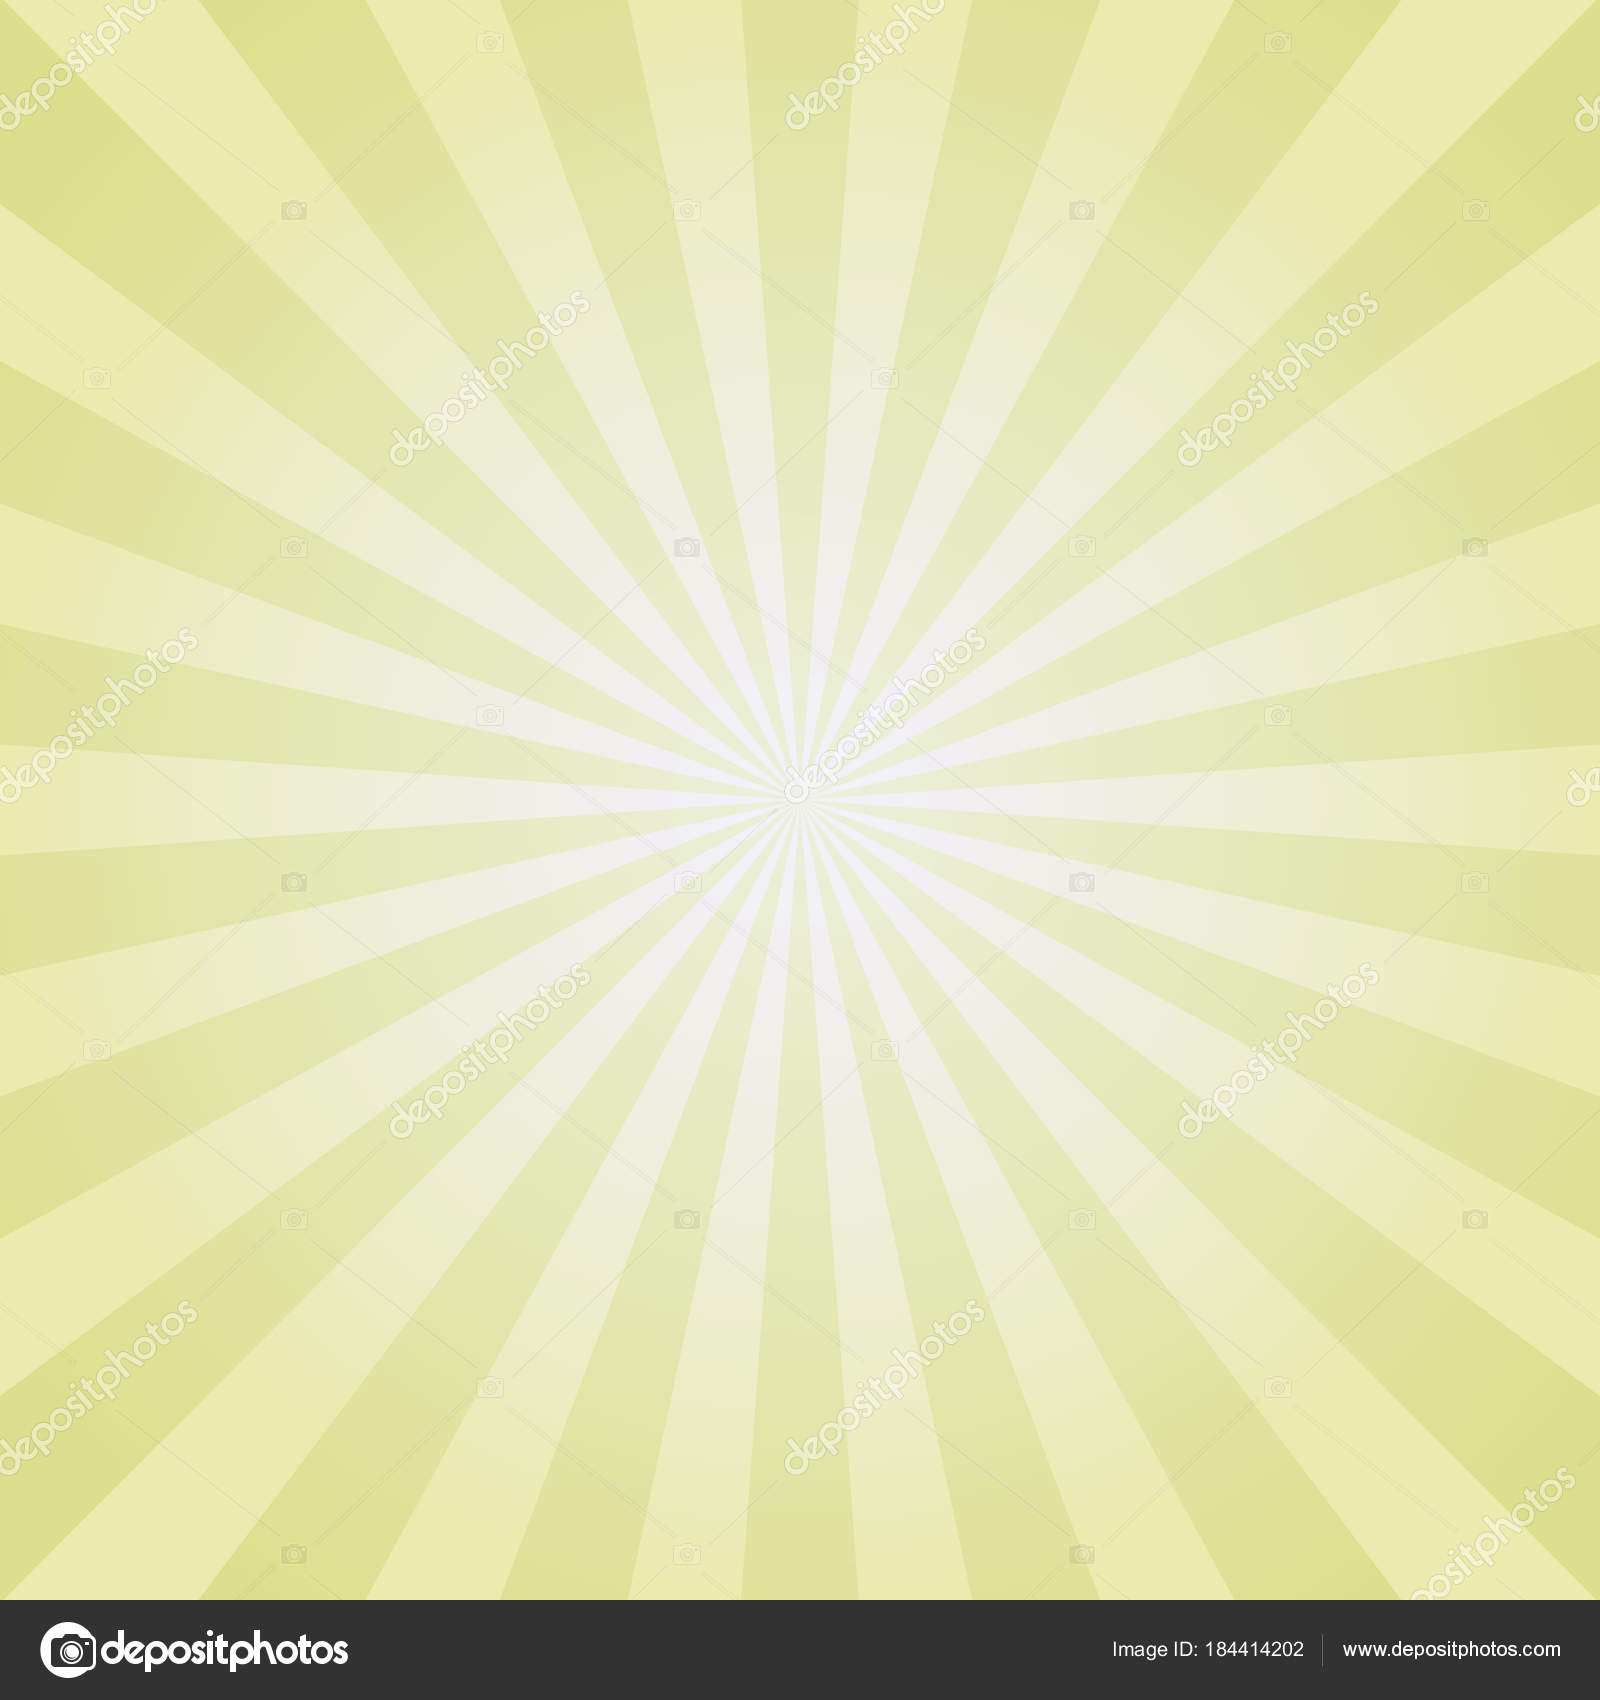 Sunlight abstract background. Yellow and white color burst ...